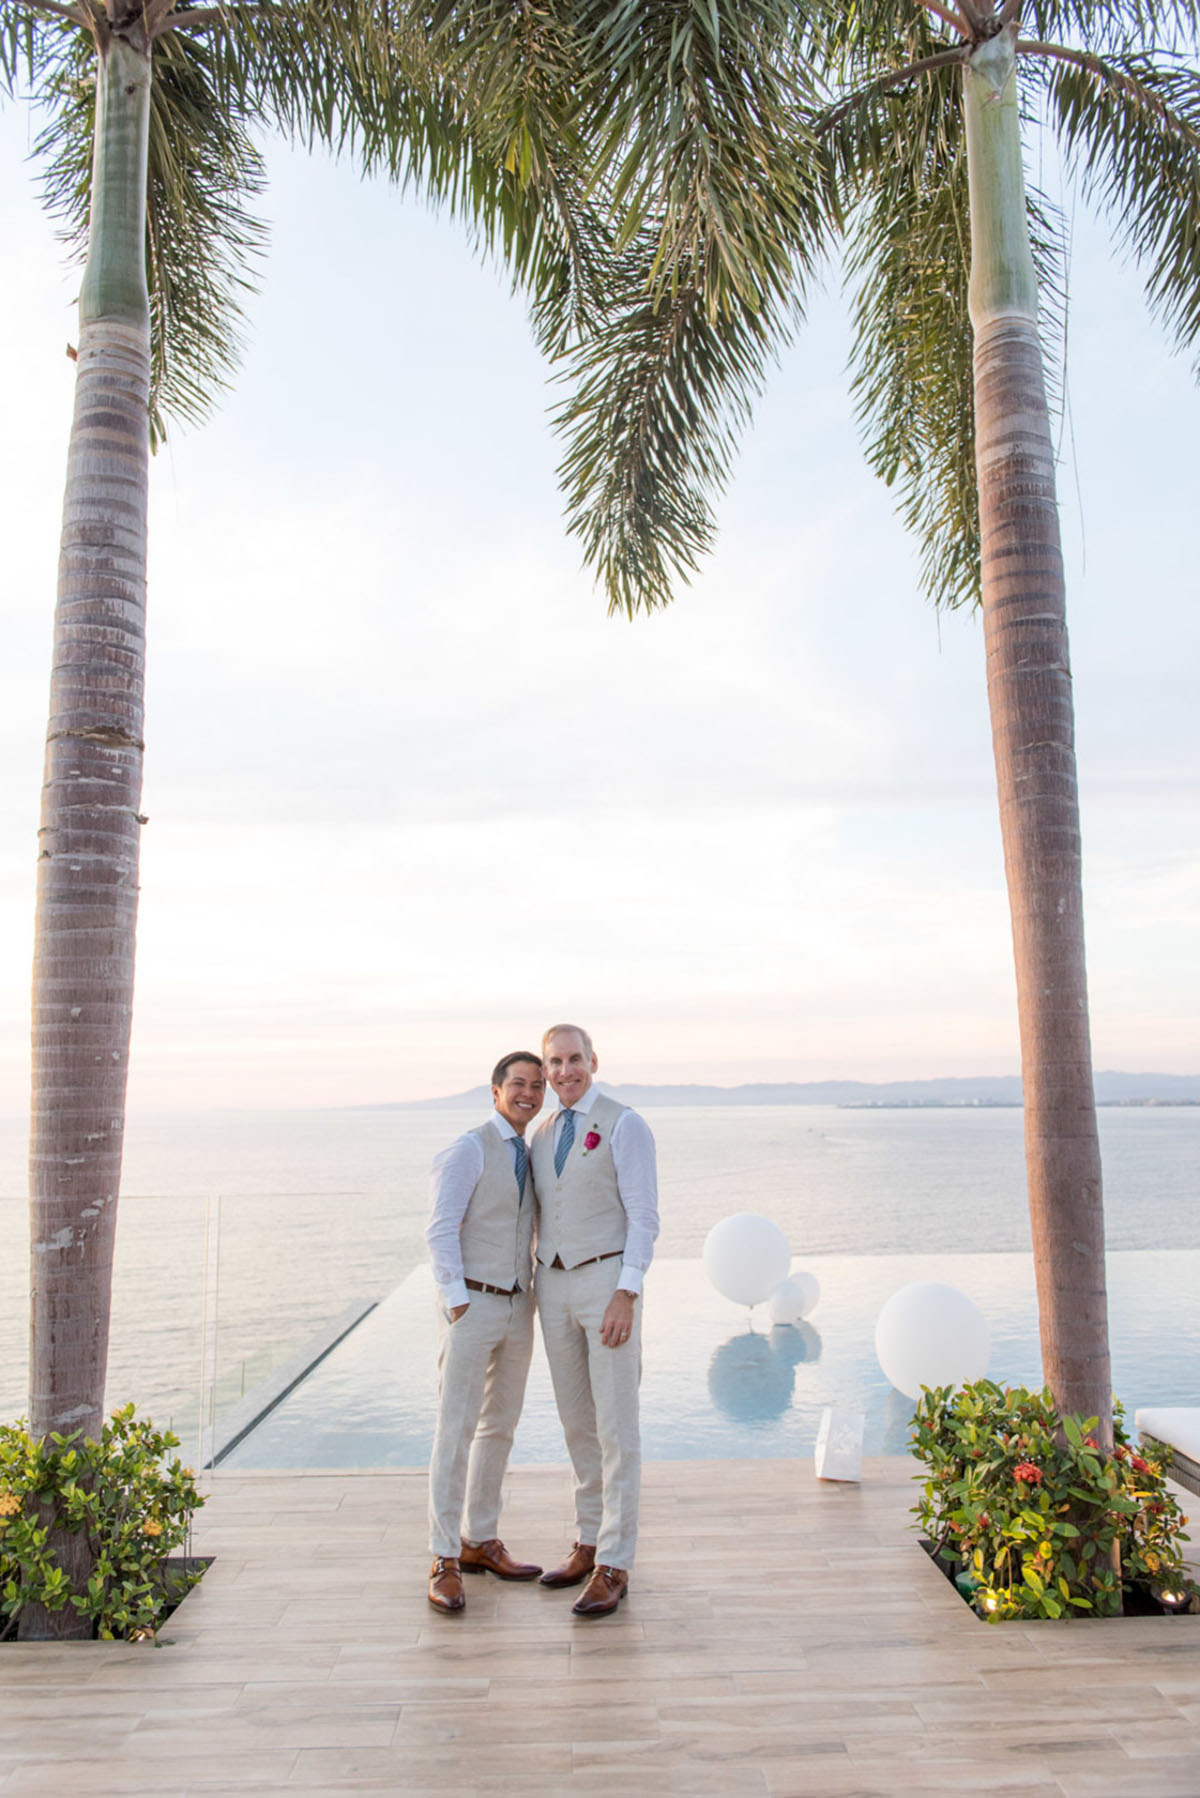 Tropical destination white beach wedding in Puerto Vallarta, Mexico two grooms linen tailored suits tradition whimsical palm trees